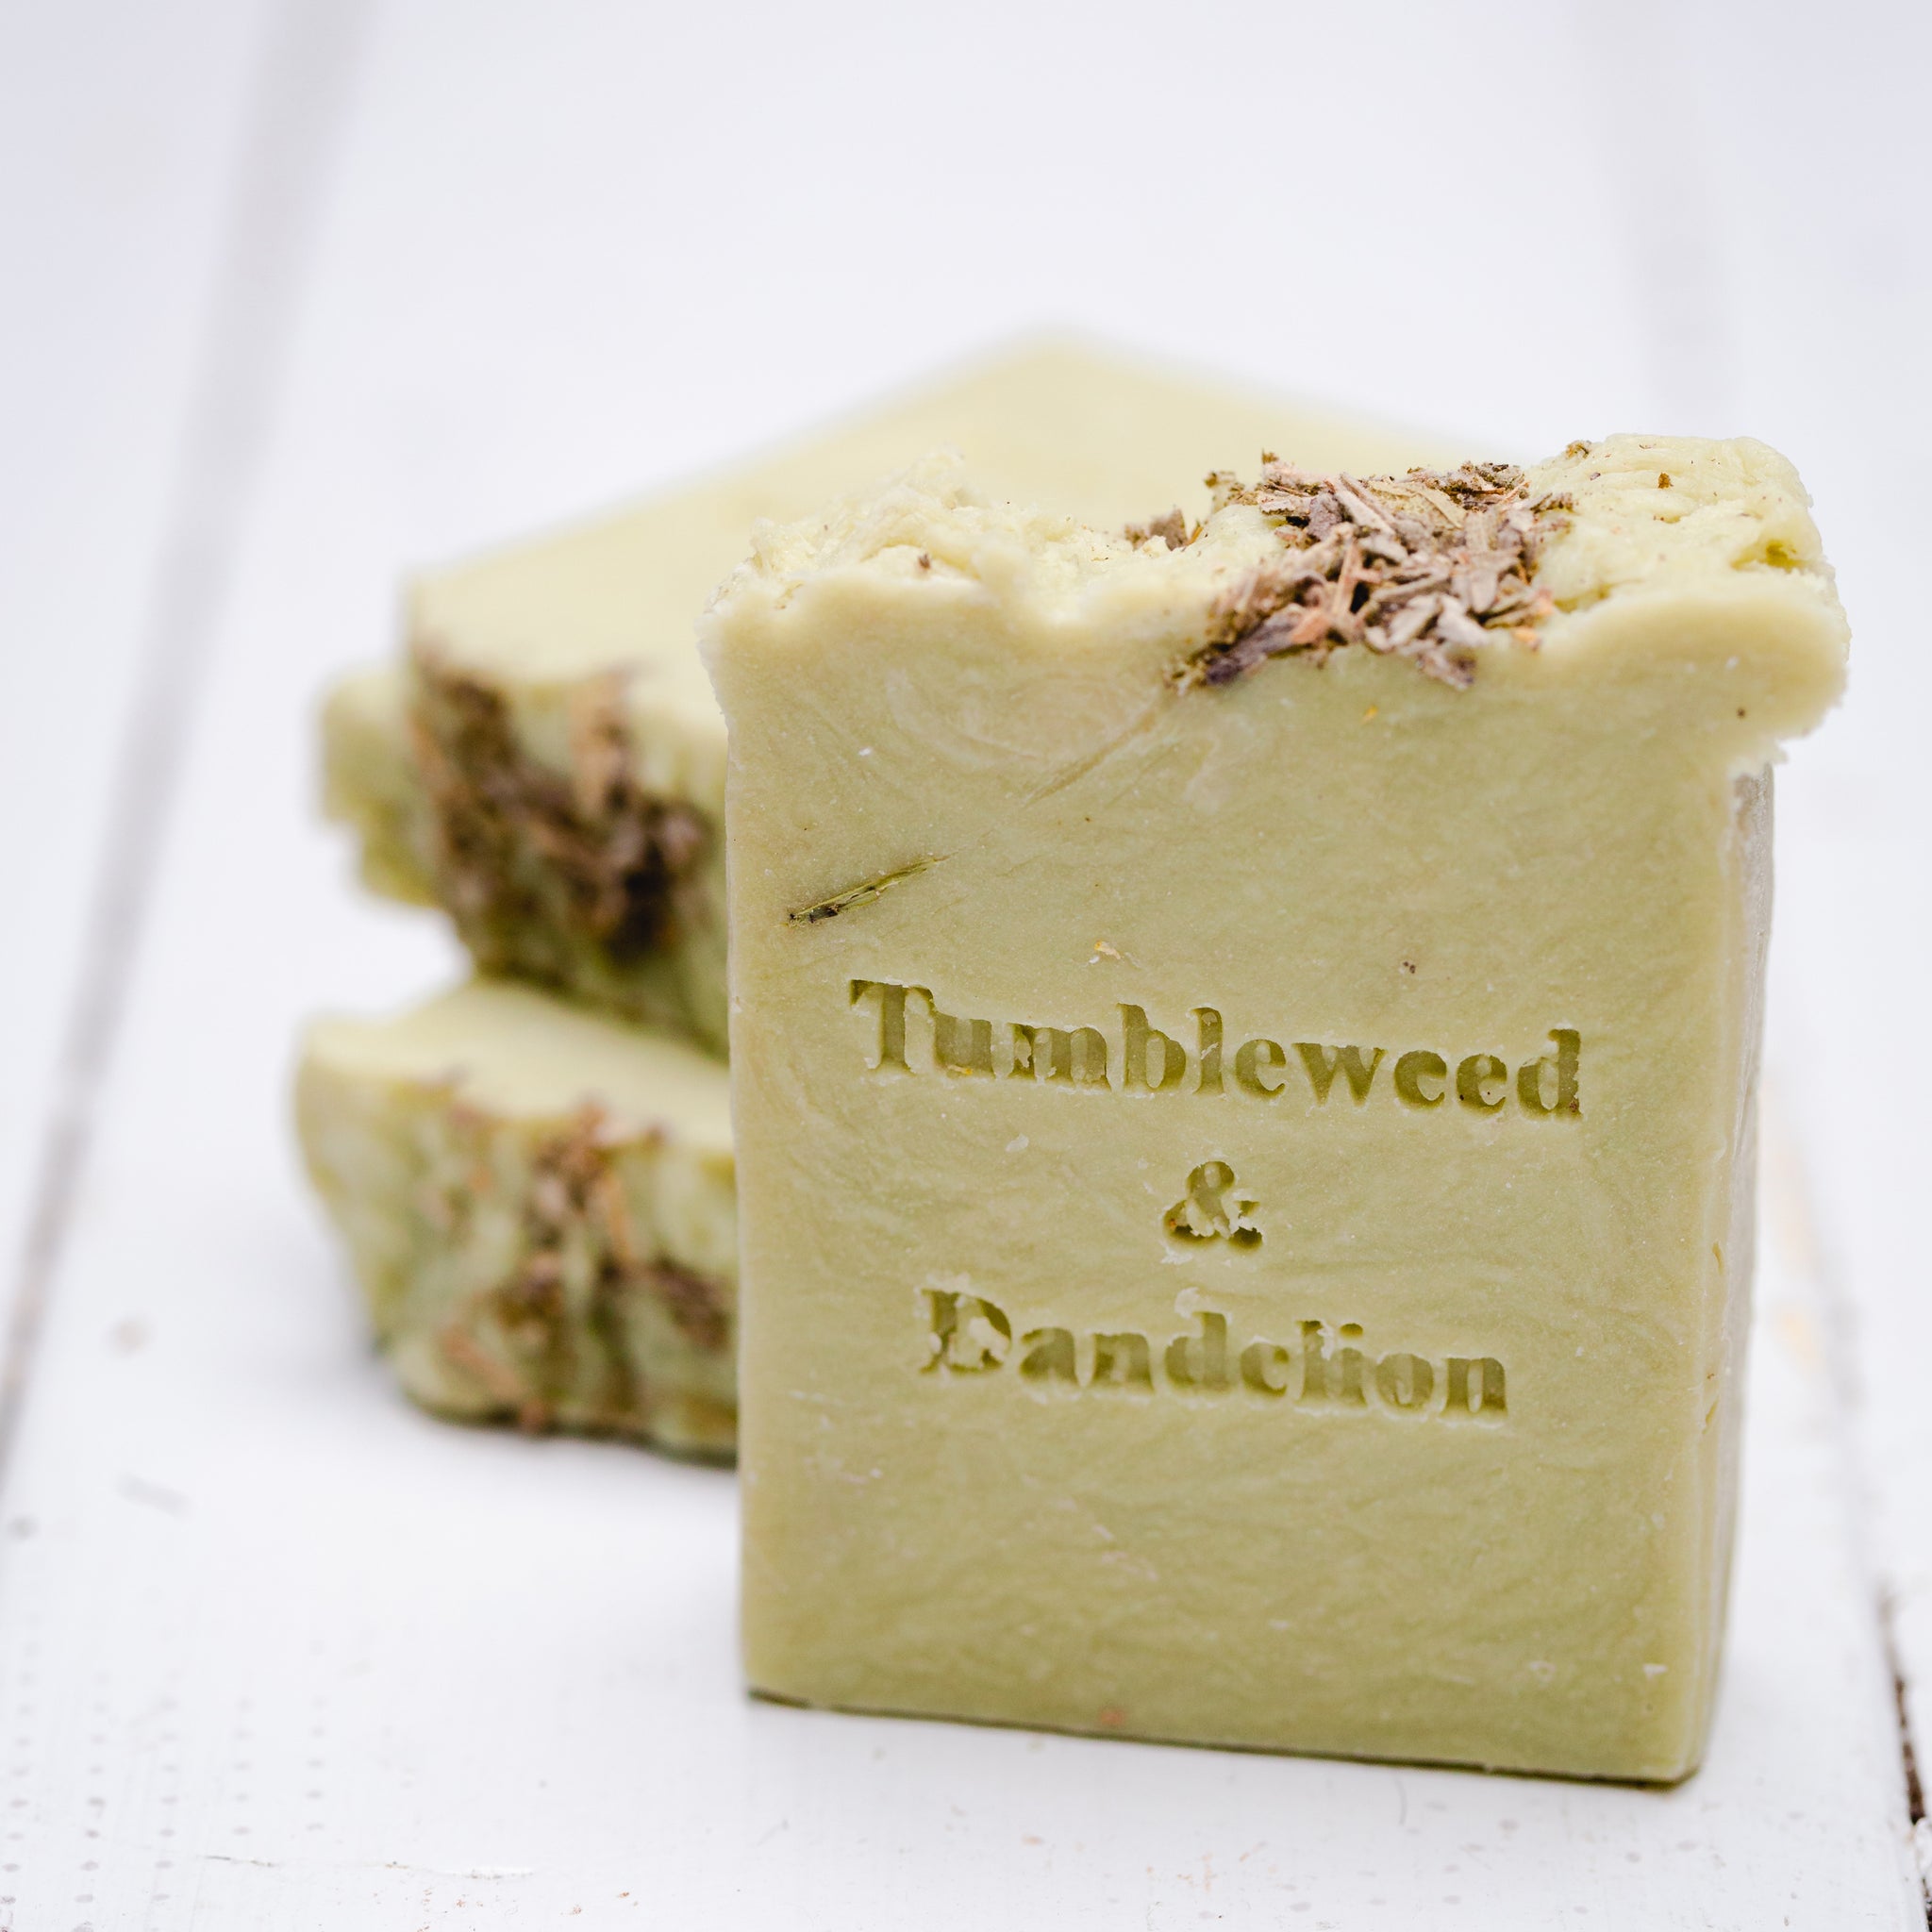 How To Use Titanium Dioxide in Soap? - Sage Oil